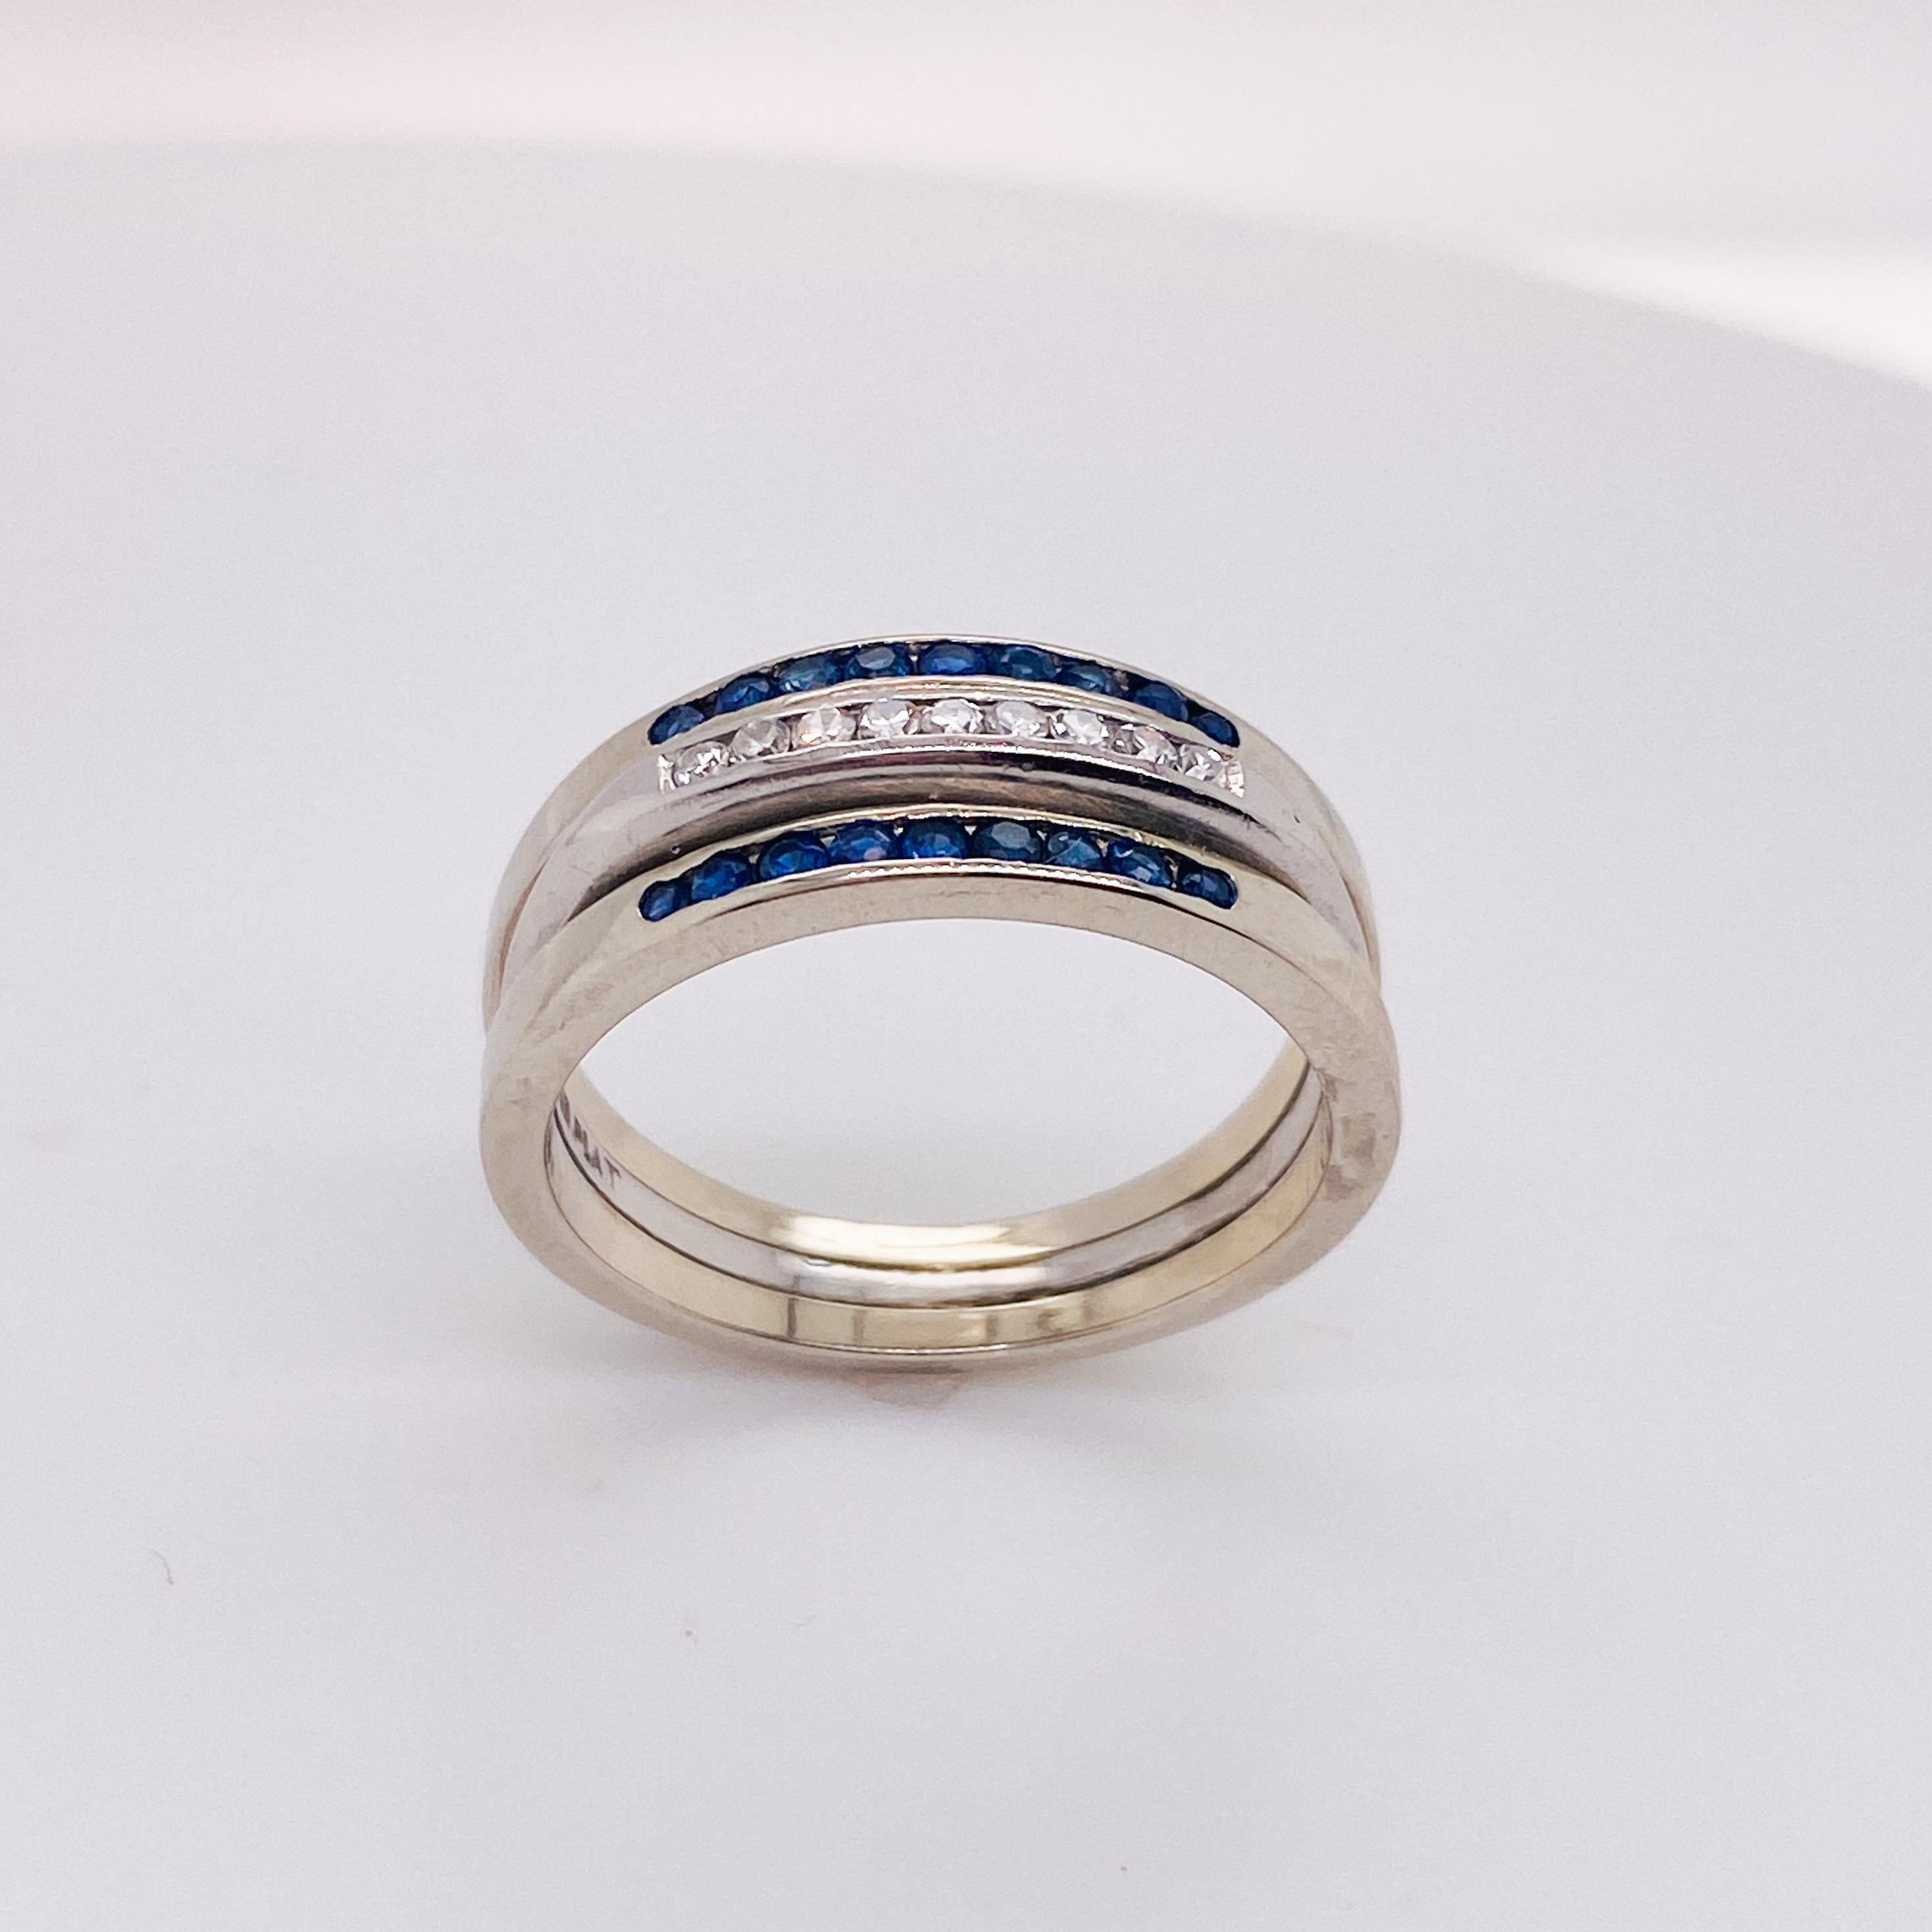 What is better than one band? Three bands! Classic elegance and a pop of rich royal blue make a perfect compliment to any day with this three ring set! Is 9 a number that keeps occurring in important ways in your life? We've got it three times over!